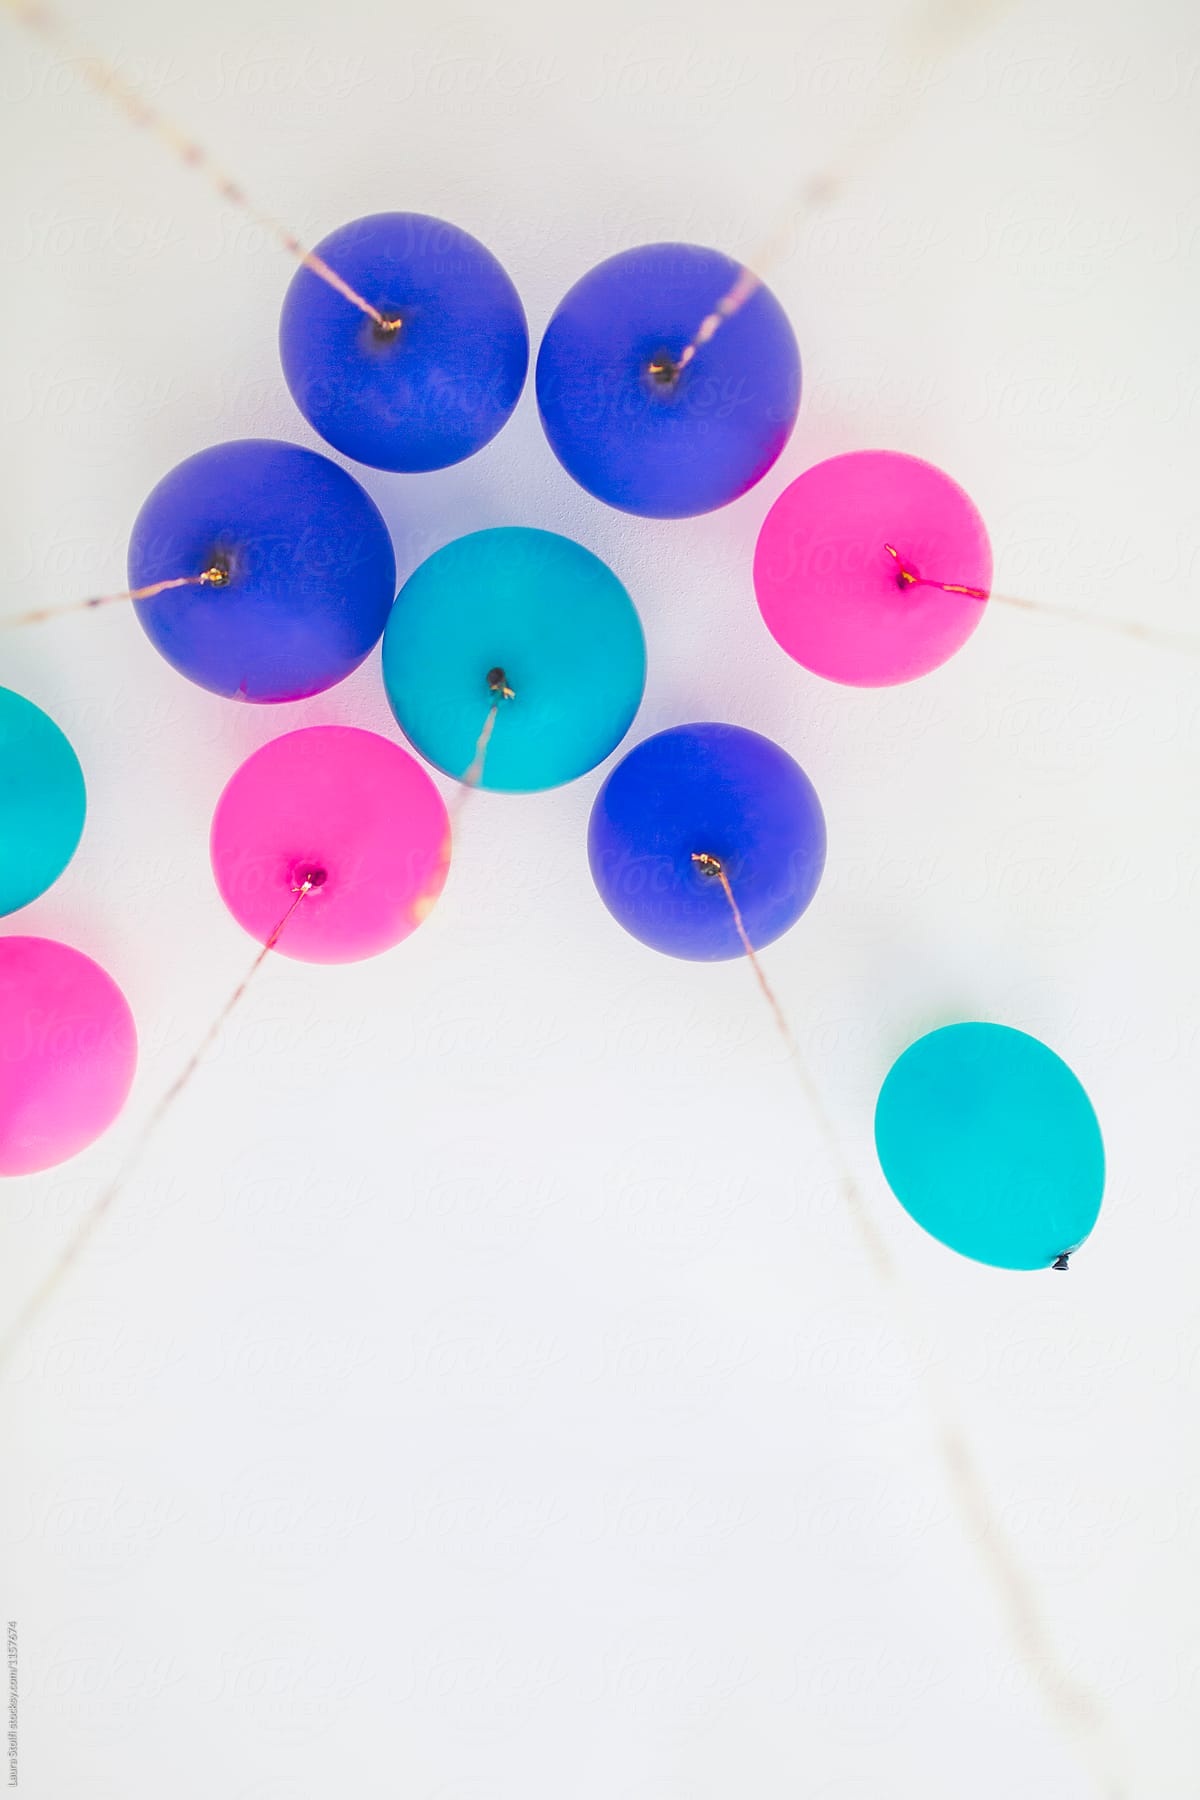 Blue, teal and magenta balloons, with golden cords